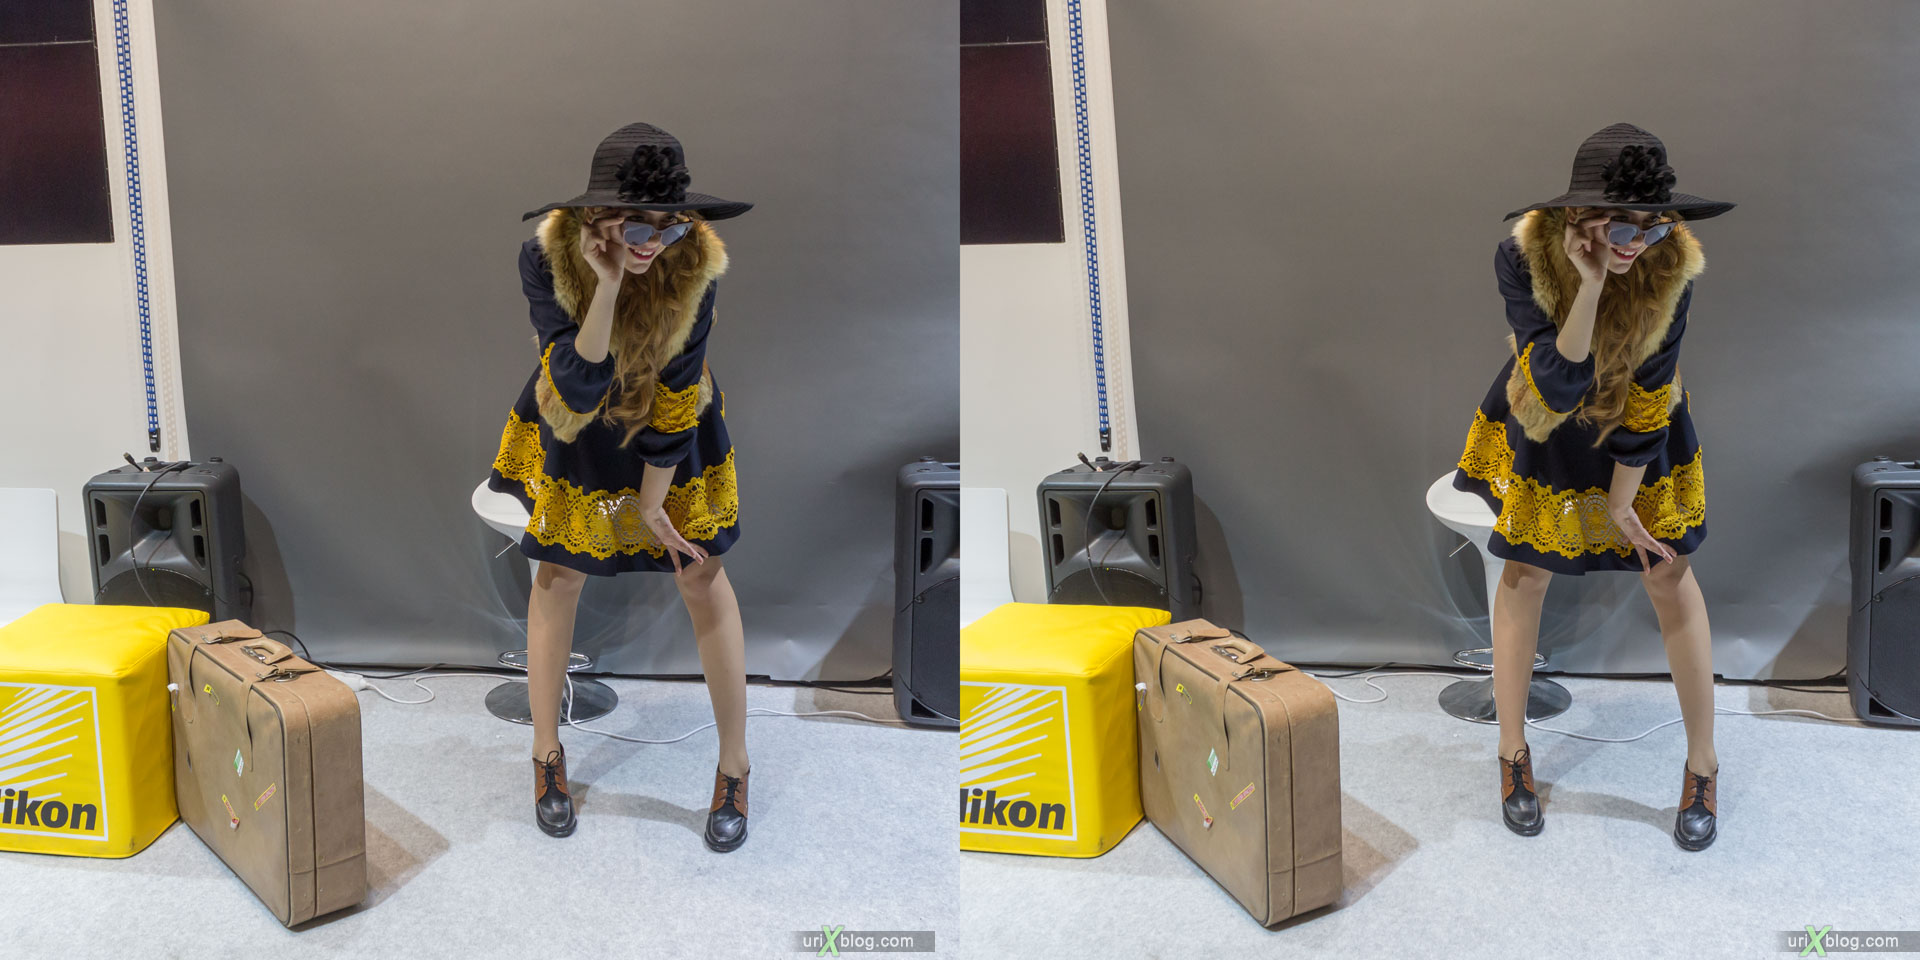 model, girl, Photoforum, exhibition, Crocus Expo, Moscow, Russia, 3D, stereo pair, cross-eyed, crossview, cross view stereo pair, stereoscopic, 2015